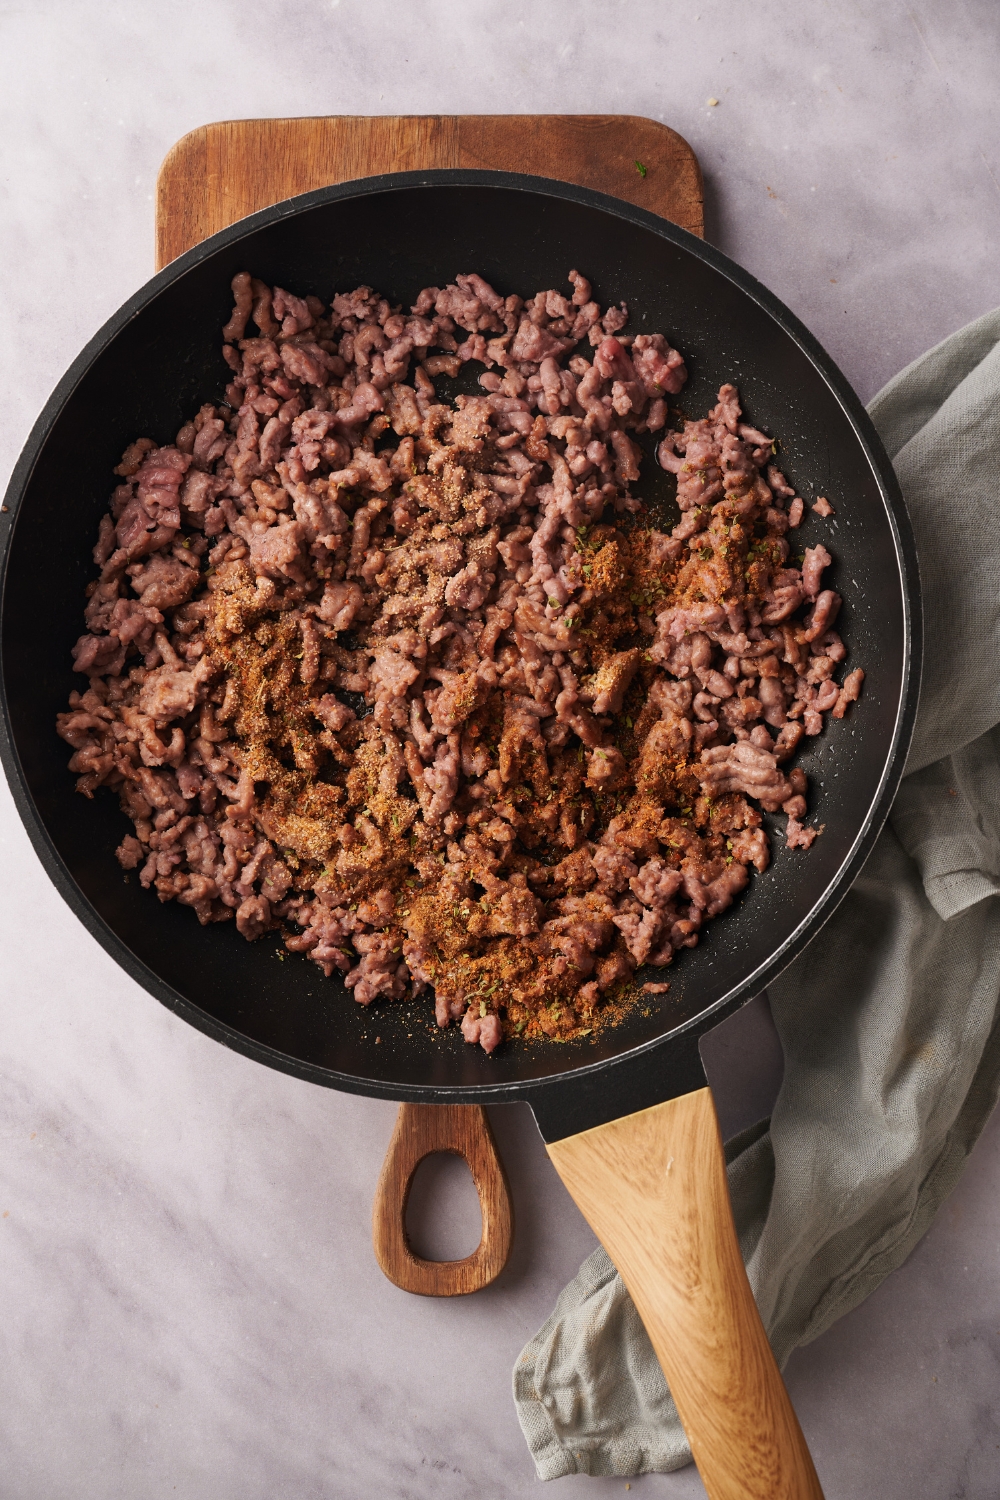 A skillet filled with cooked and seasoned ground beef.